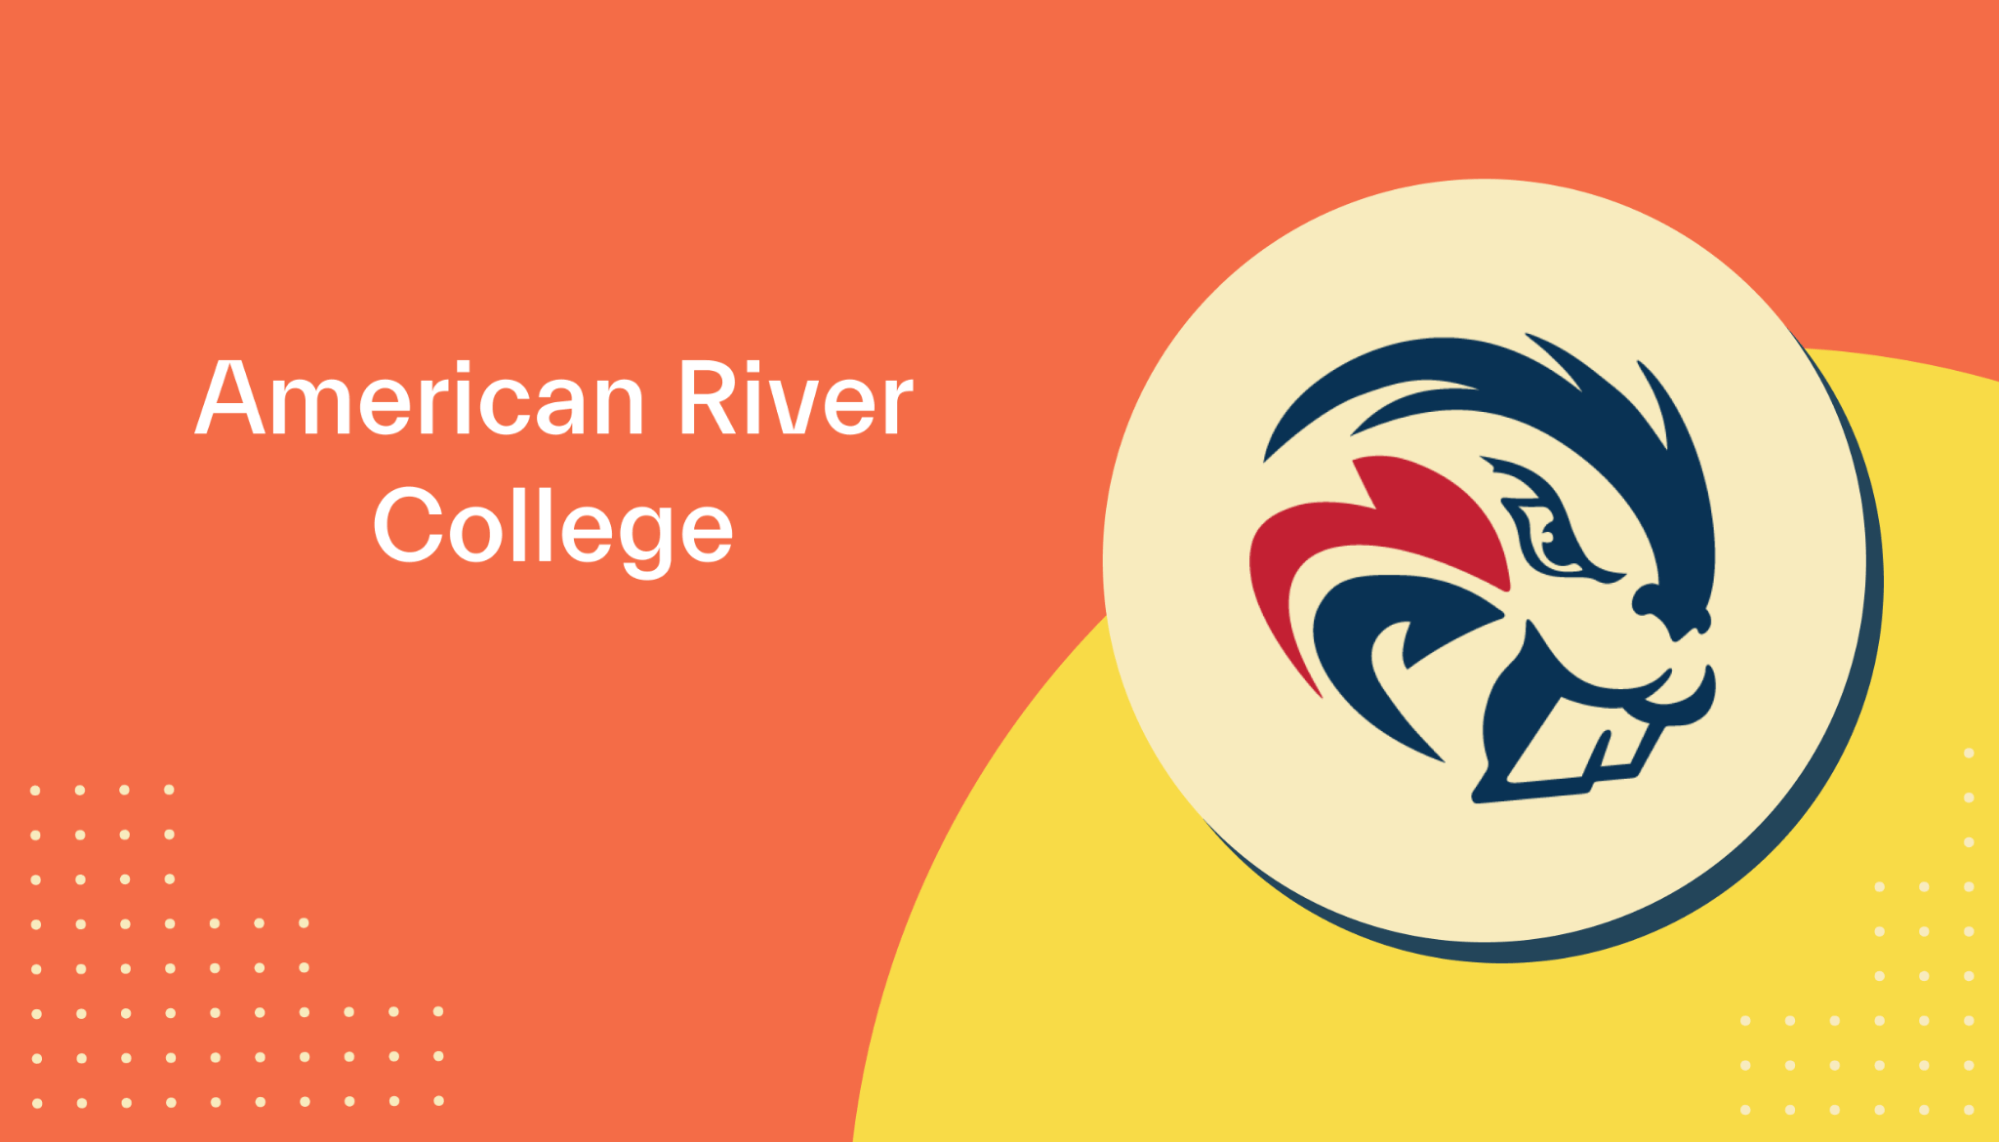 Financial aid at American River College